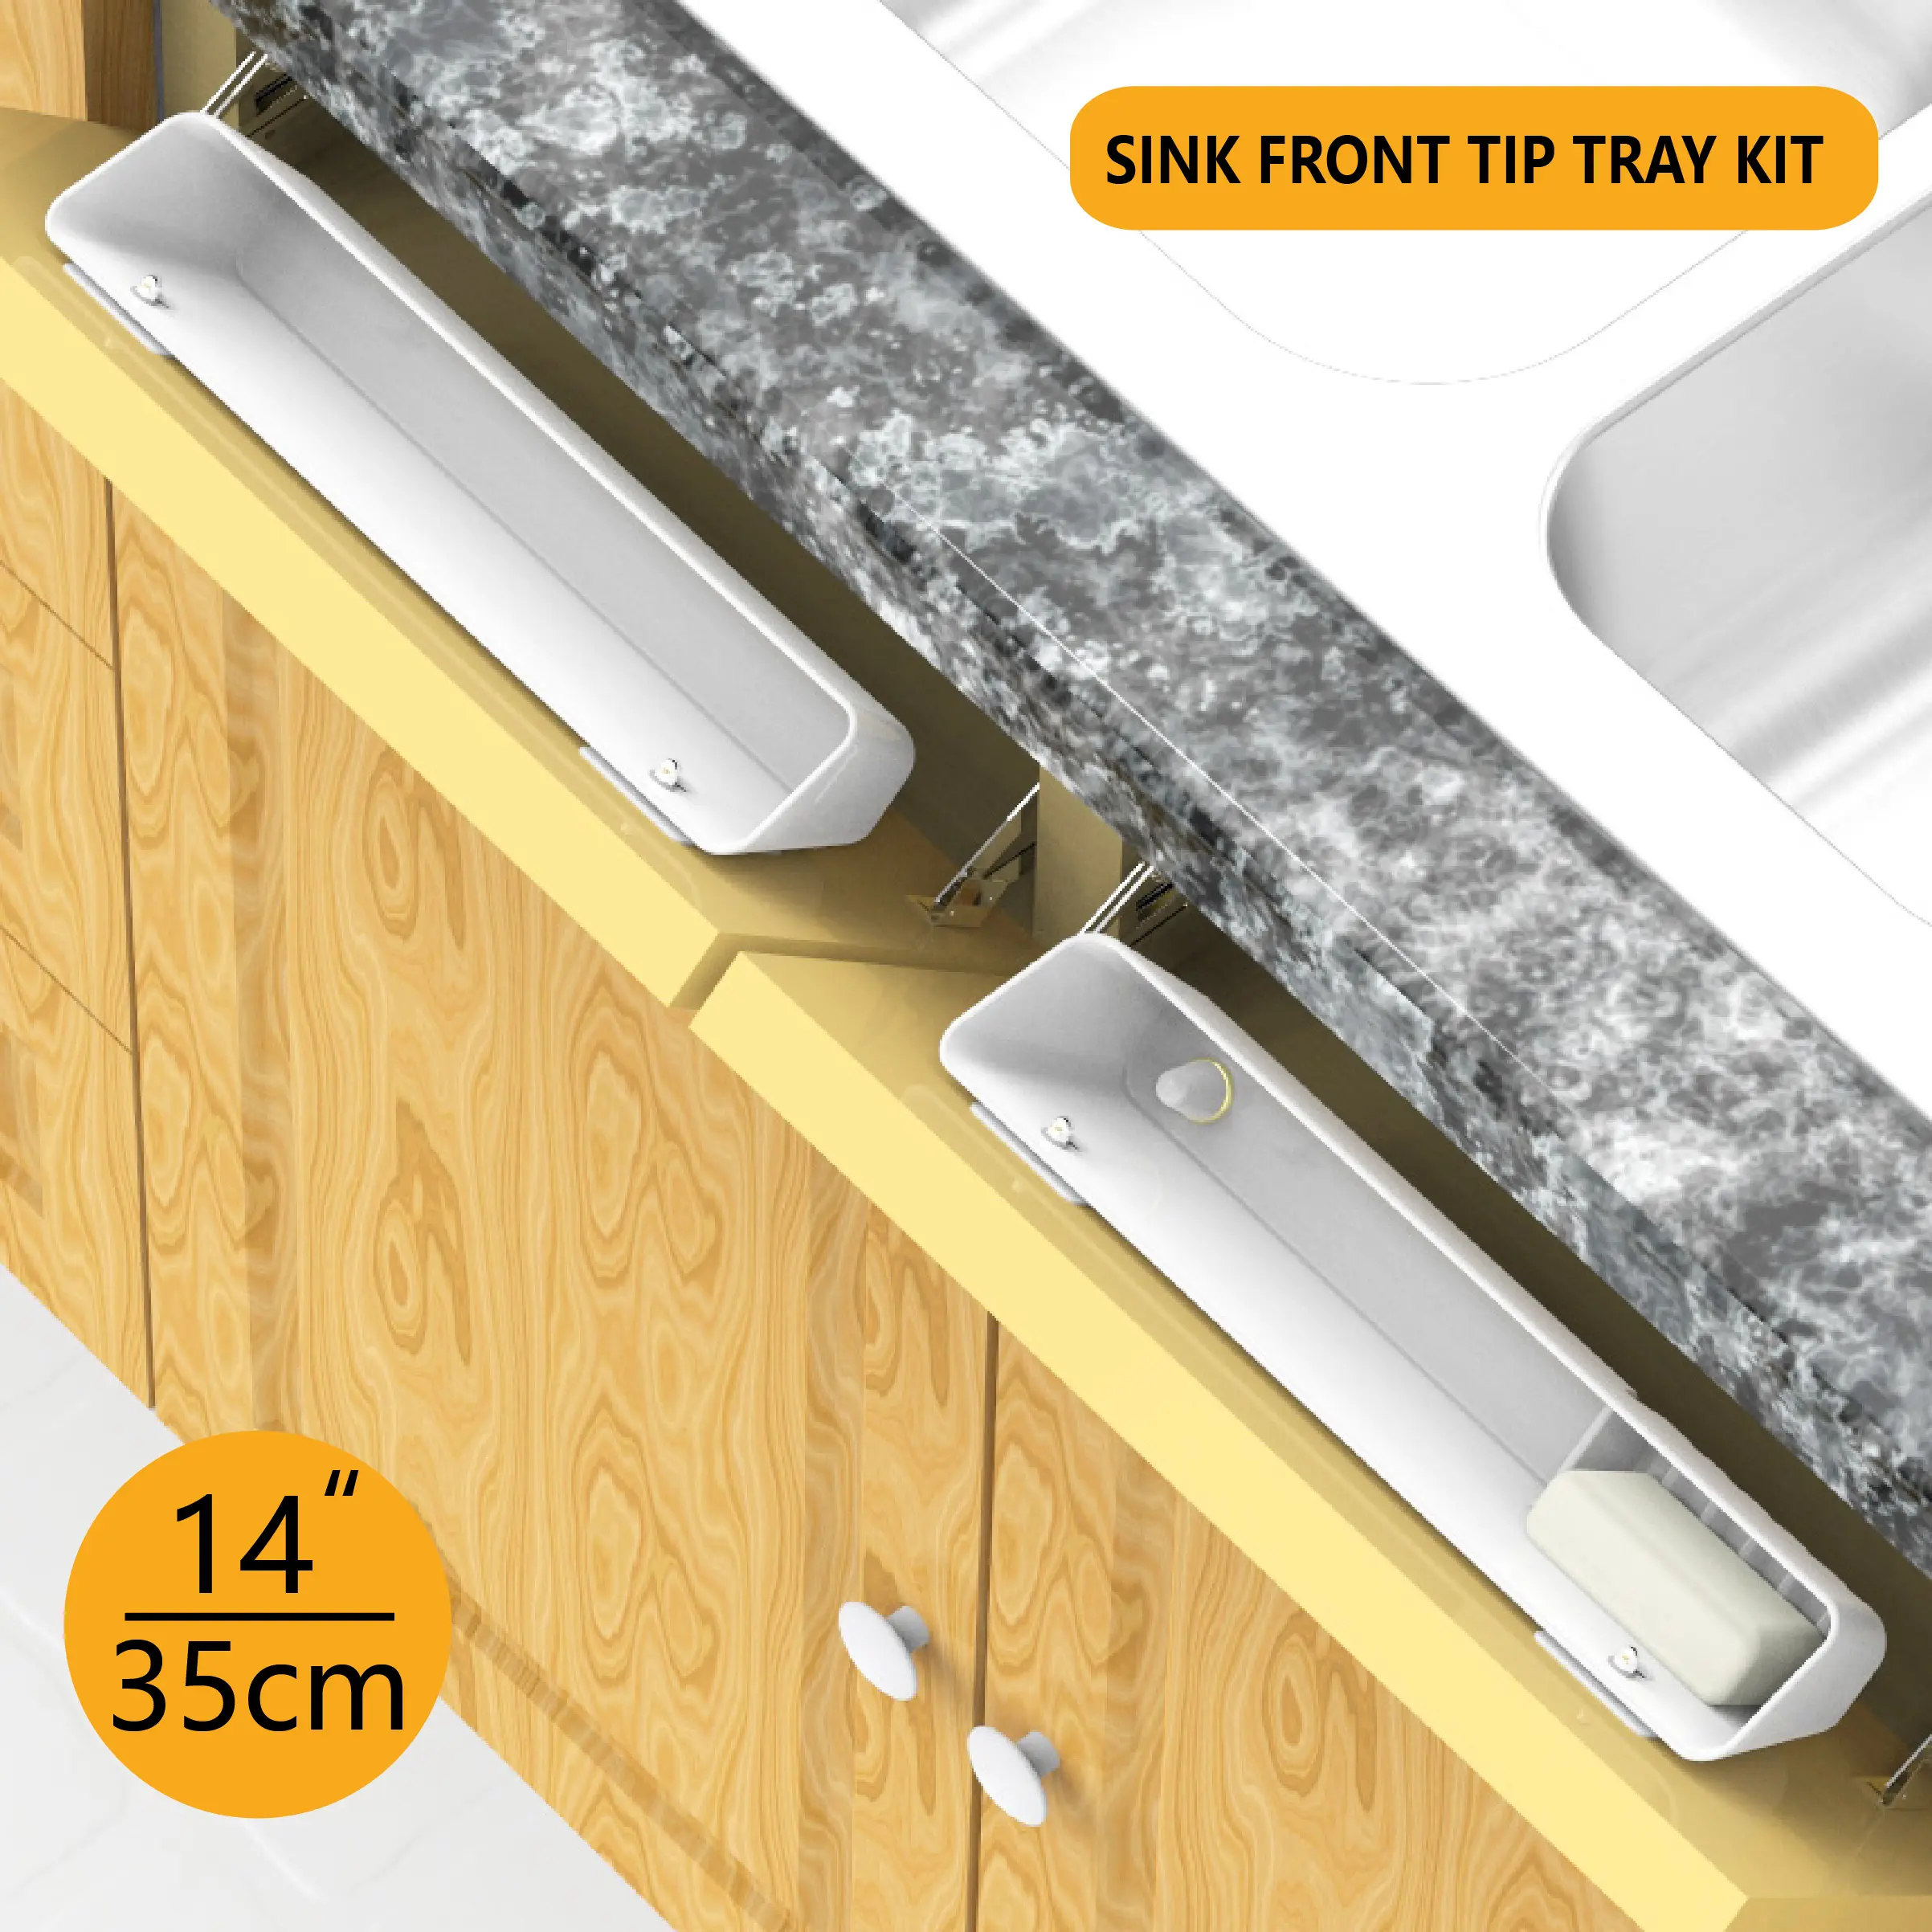 14" fast install white sink front tip out tray kit for Kitchen and Bathroom Base Cabinet